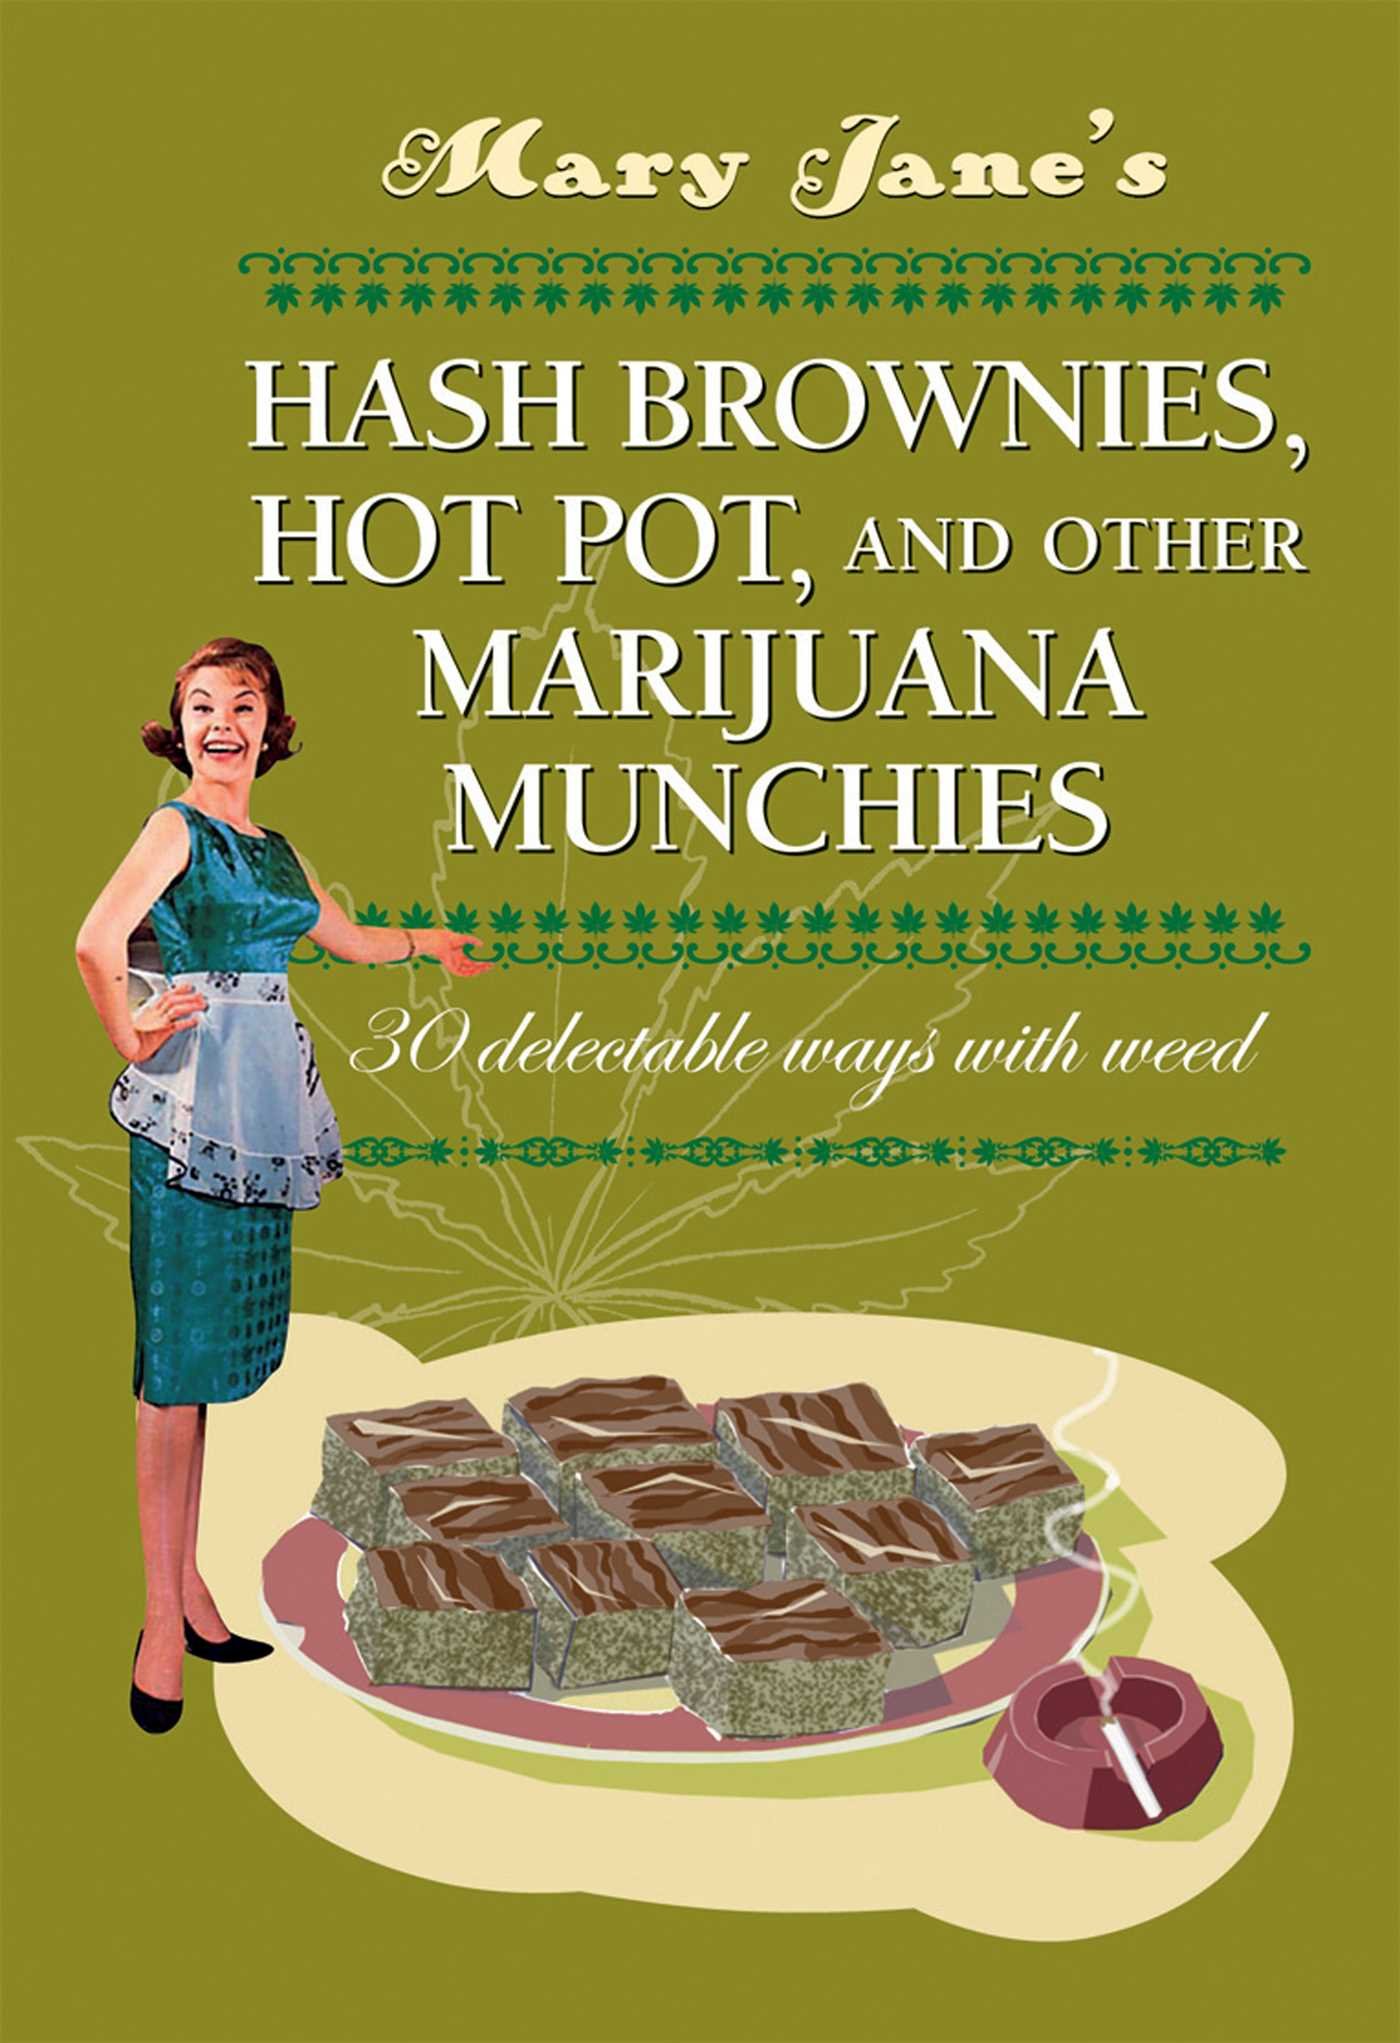 Mary Jane's Hash Brownies, Hot Pot and Other Marijuana Munchies - Dr. Hash